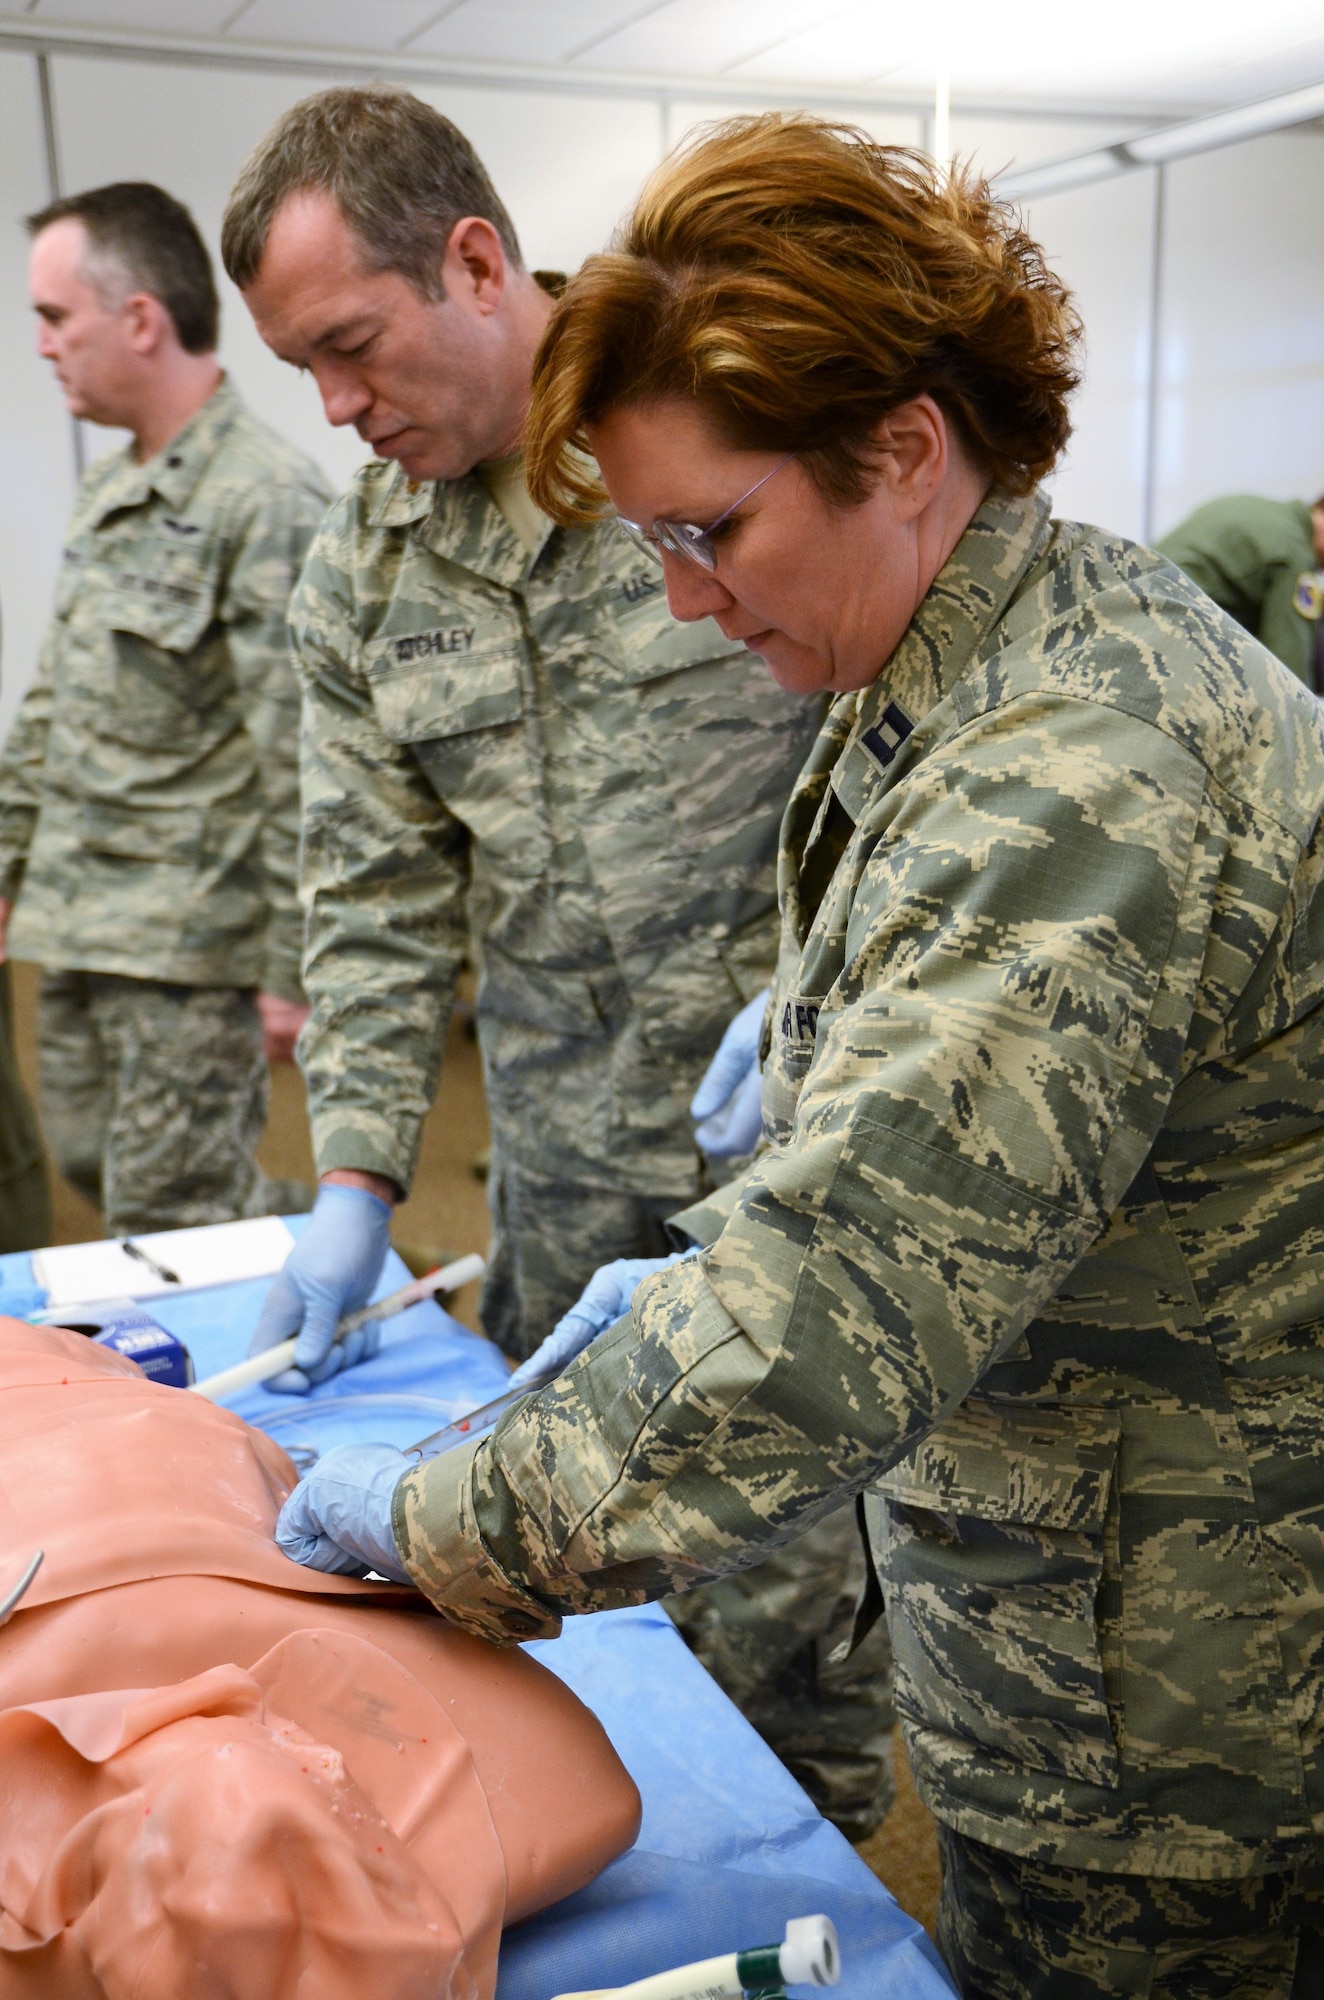 U.S. Air Force Capt. Frances Burress, with the 116th Medical Group (MDG), Georgia Air National Guard, places a chest tube during the thoracic trauma skills station of Advanced Trauma Life Support training at Nellis Air Force Base, Nev., Jan. 26, 2018.